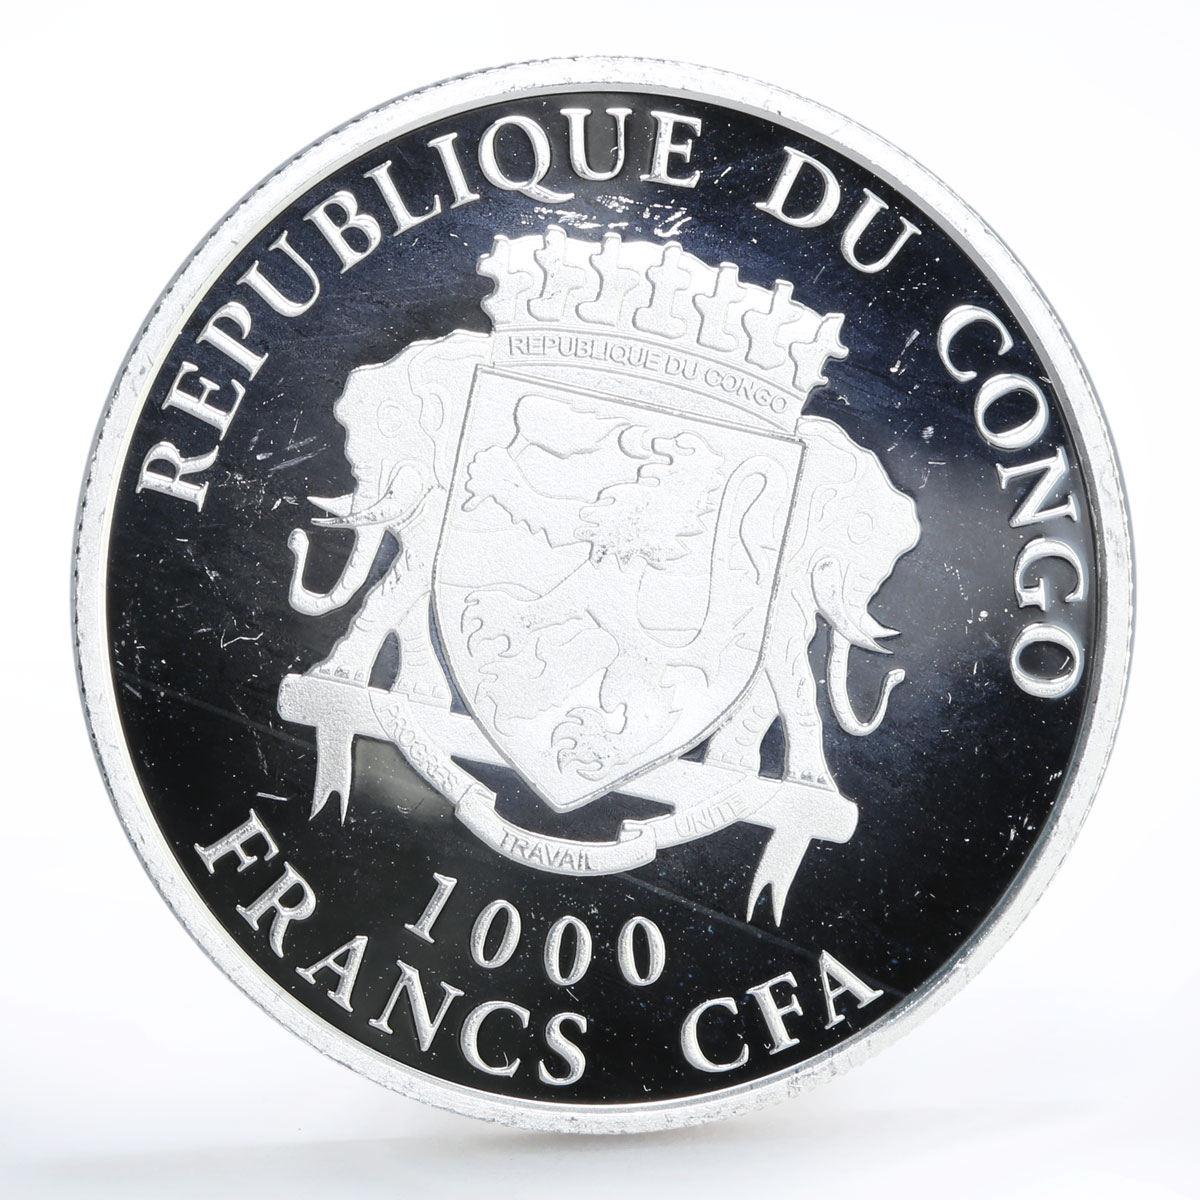 Congo 1000 francs Football World Cup in Brazil Players gilded silver coin 2012